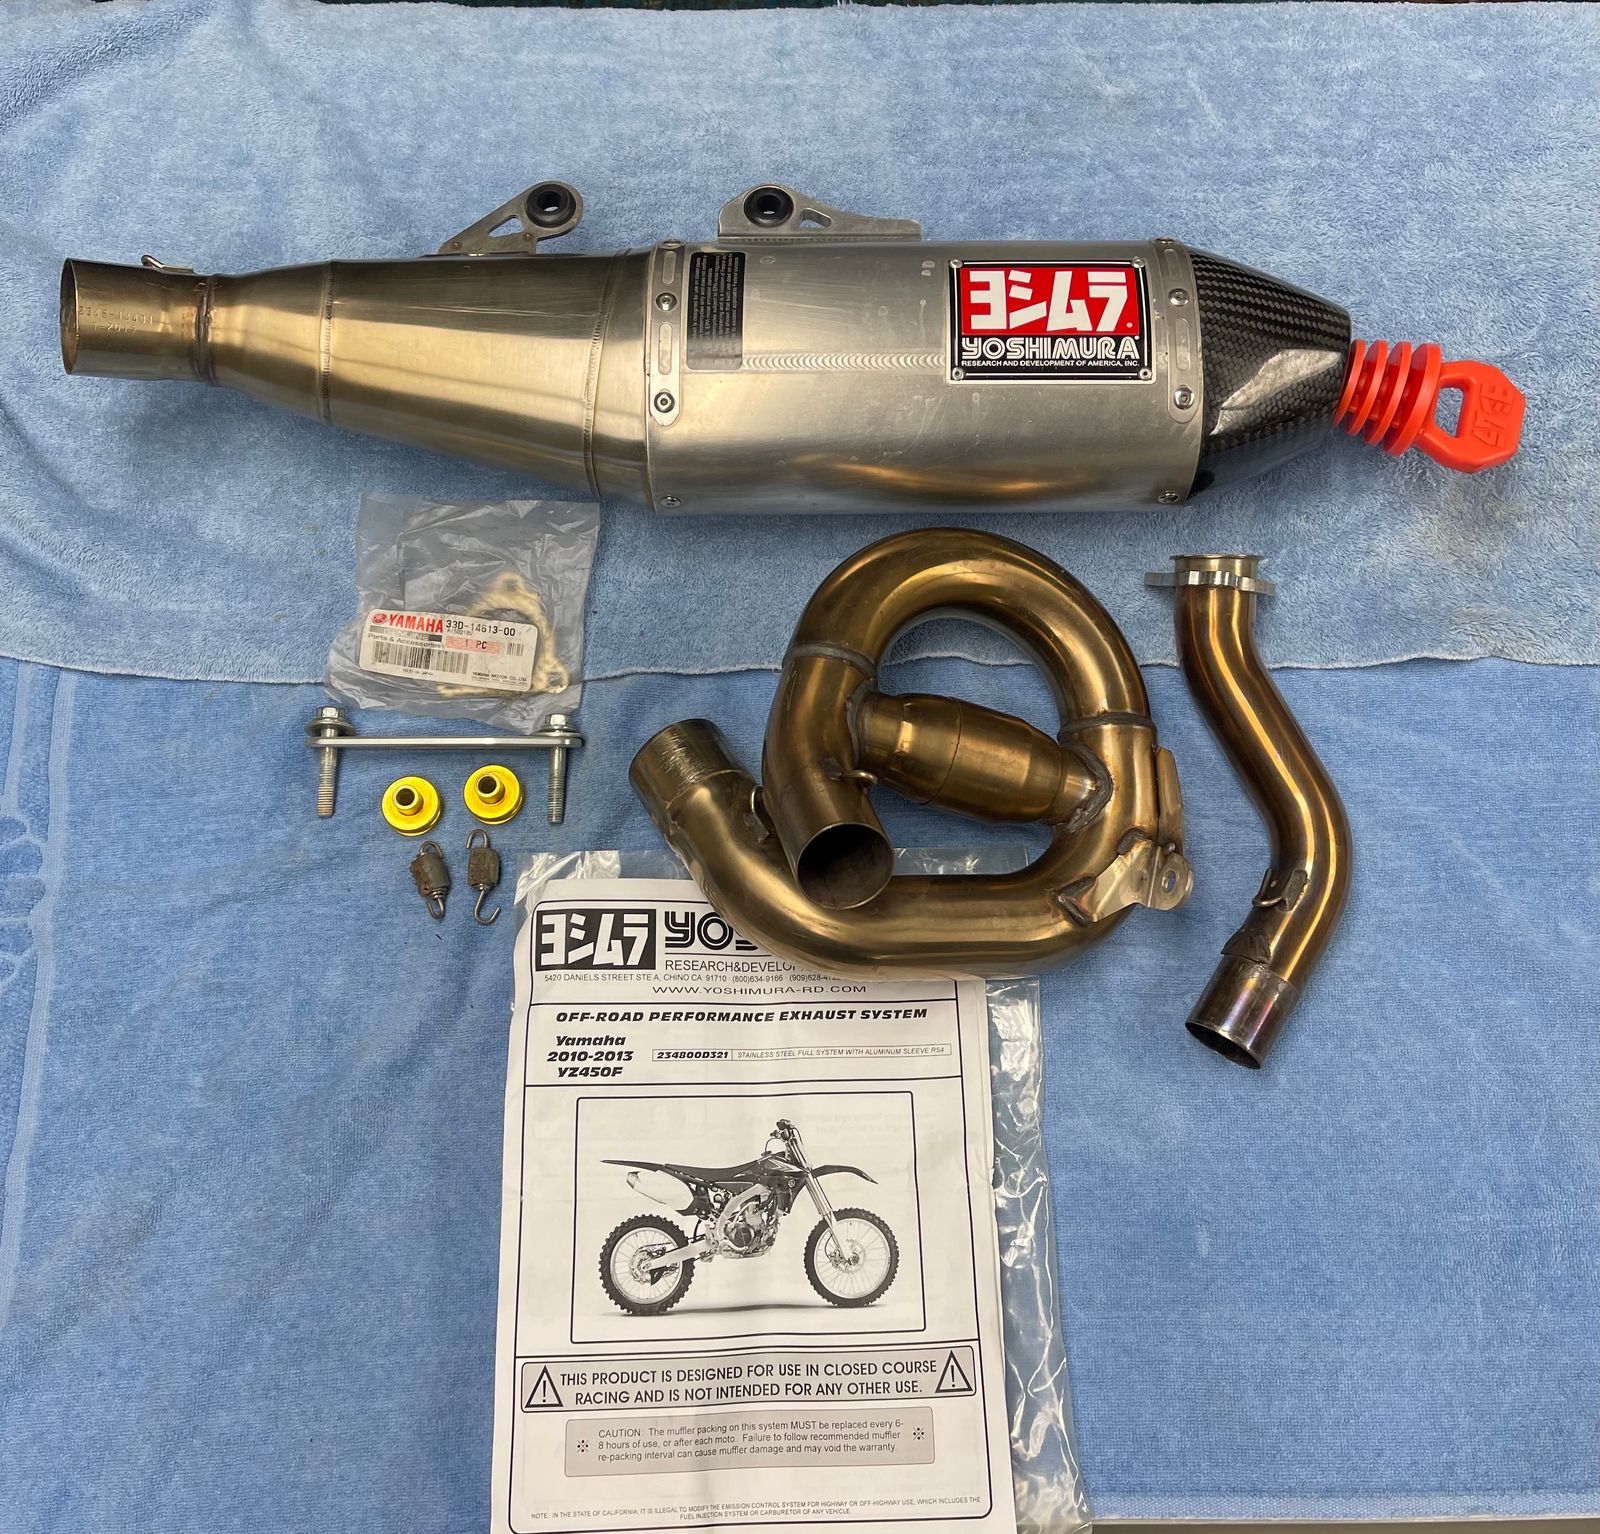 2010 - 2013 Yoshimura Full Complete Yamaha RS4 YZ450F Exhaust System